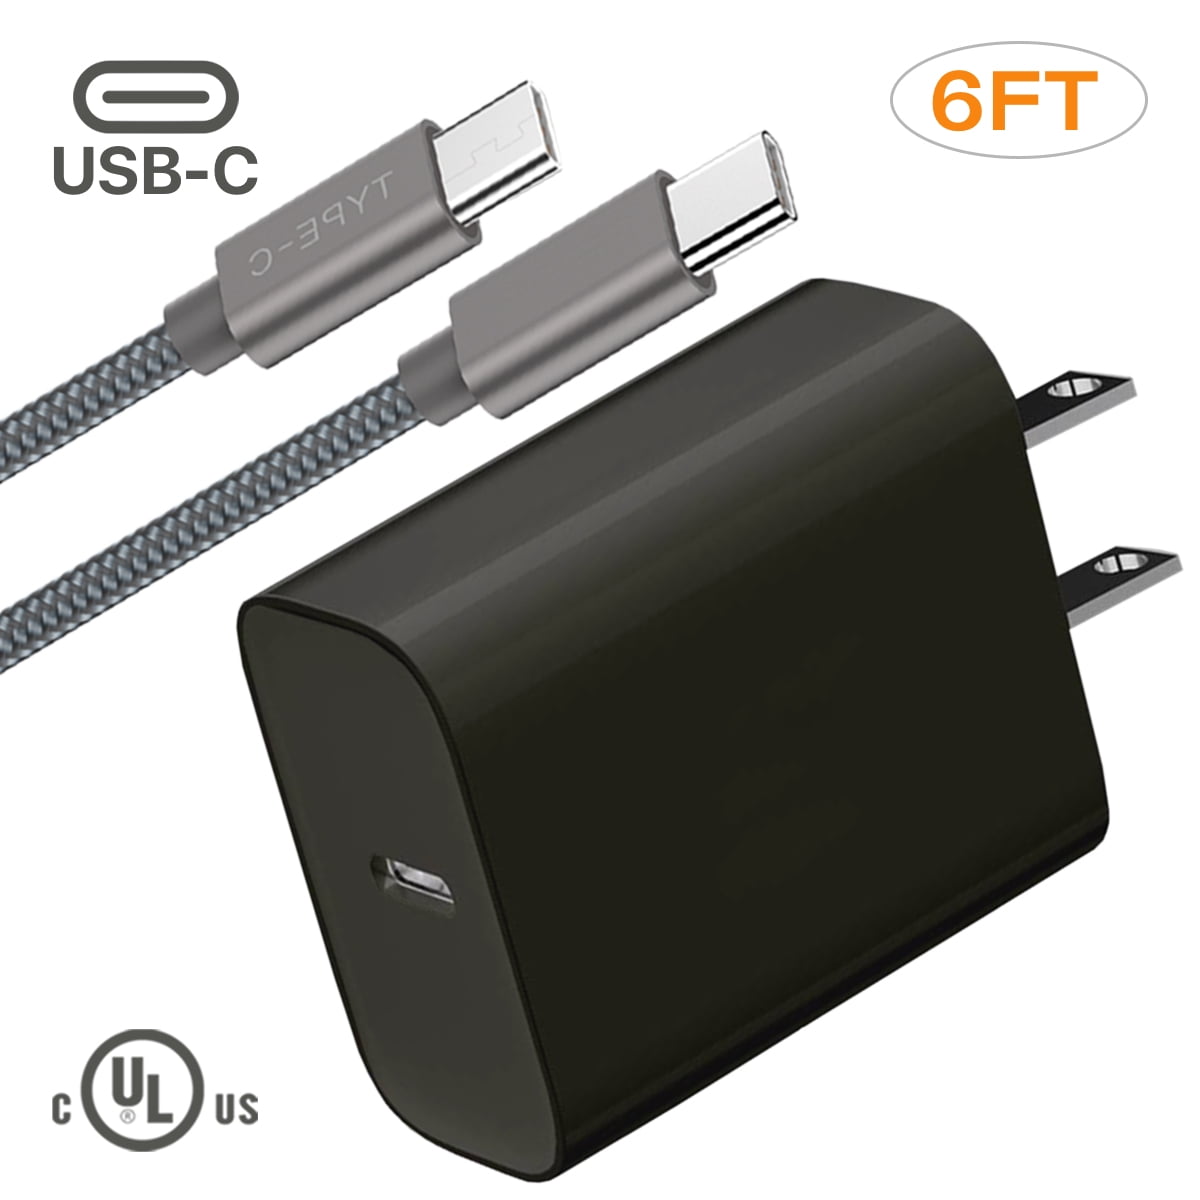 Pantom 18W USB C Type-C Wall Charger and Fast Charging Cable Compatible with iPhone 11/11 Pro/11 Pro Max/X/XS/XS Max/XR/8/8 Plus/7/7 Plus/6s/6s Plus/5/SE iPad Air/Mini/iPod